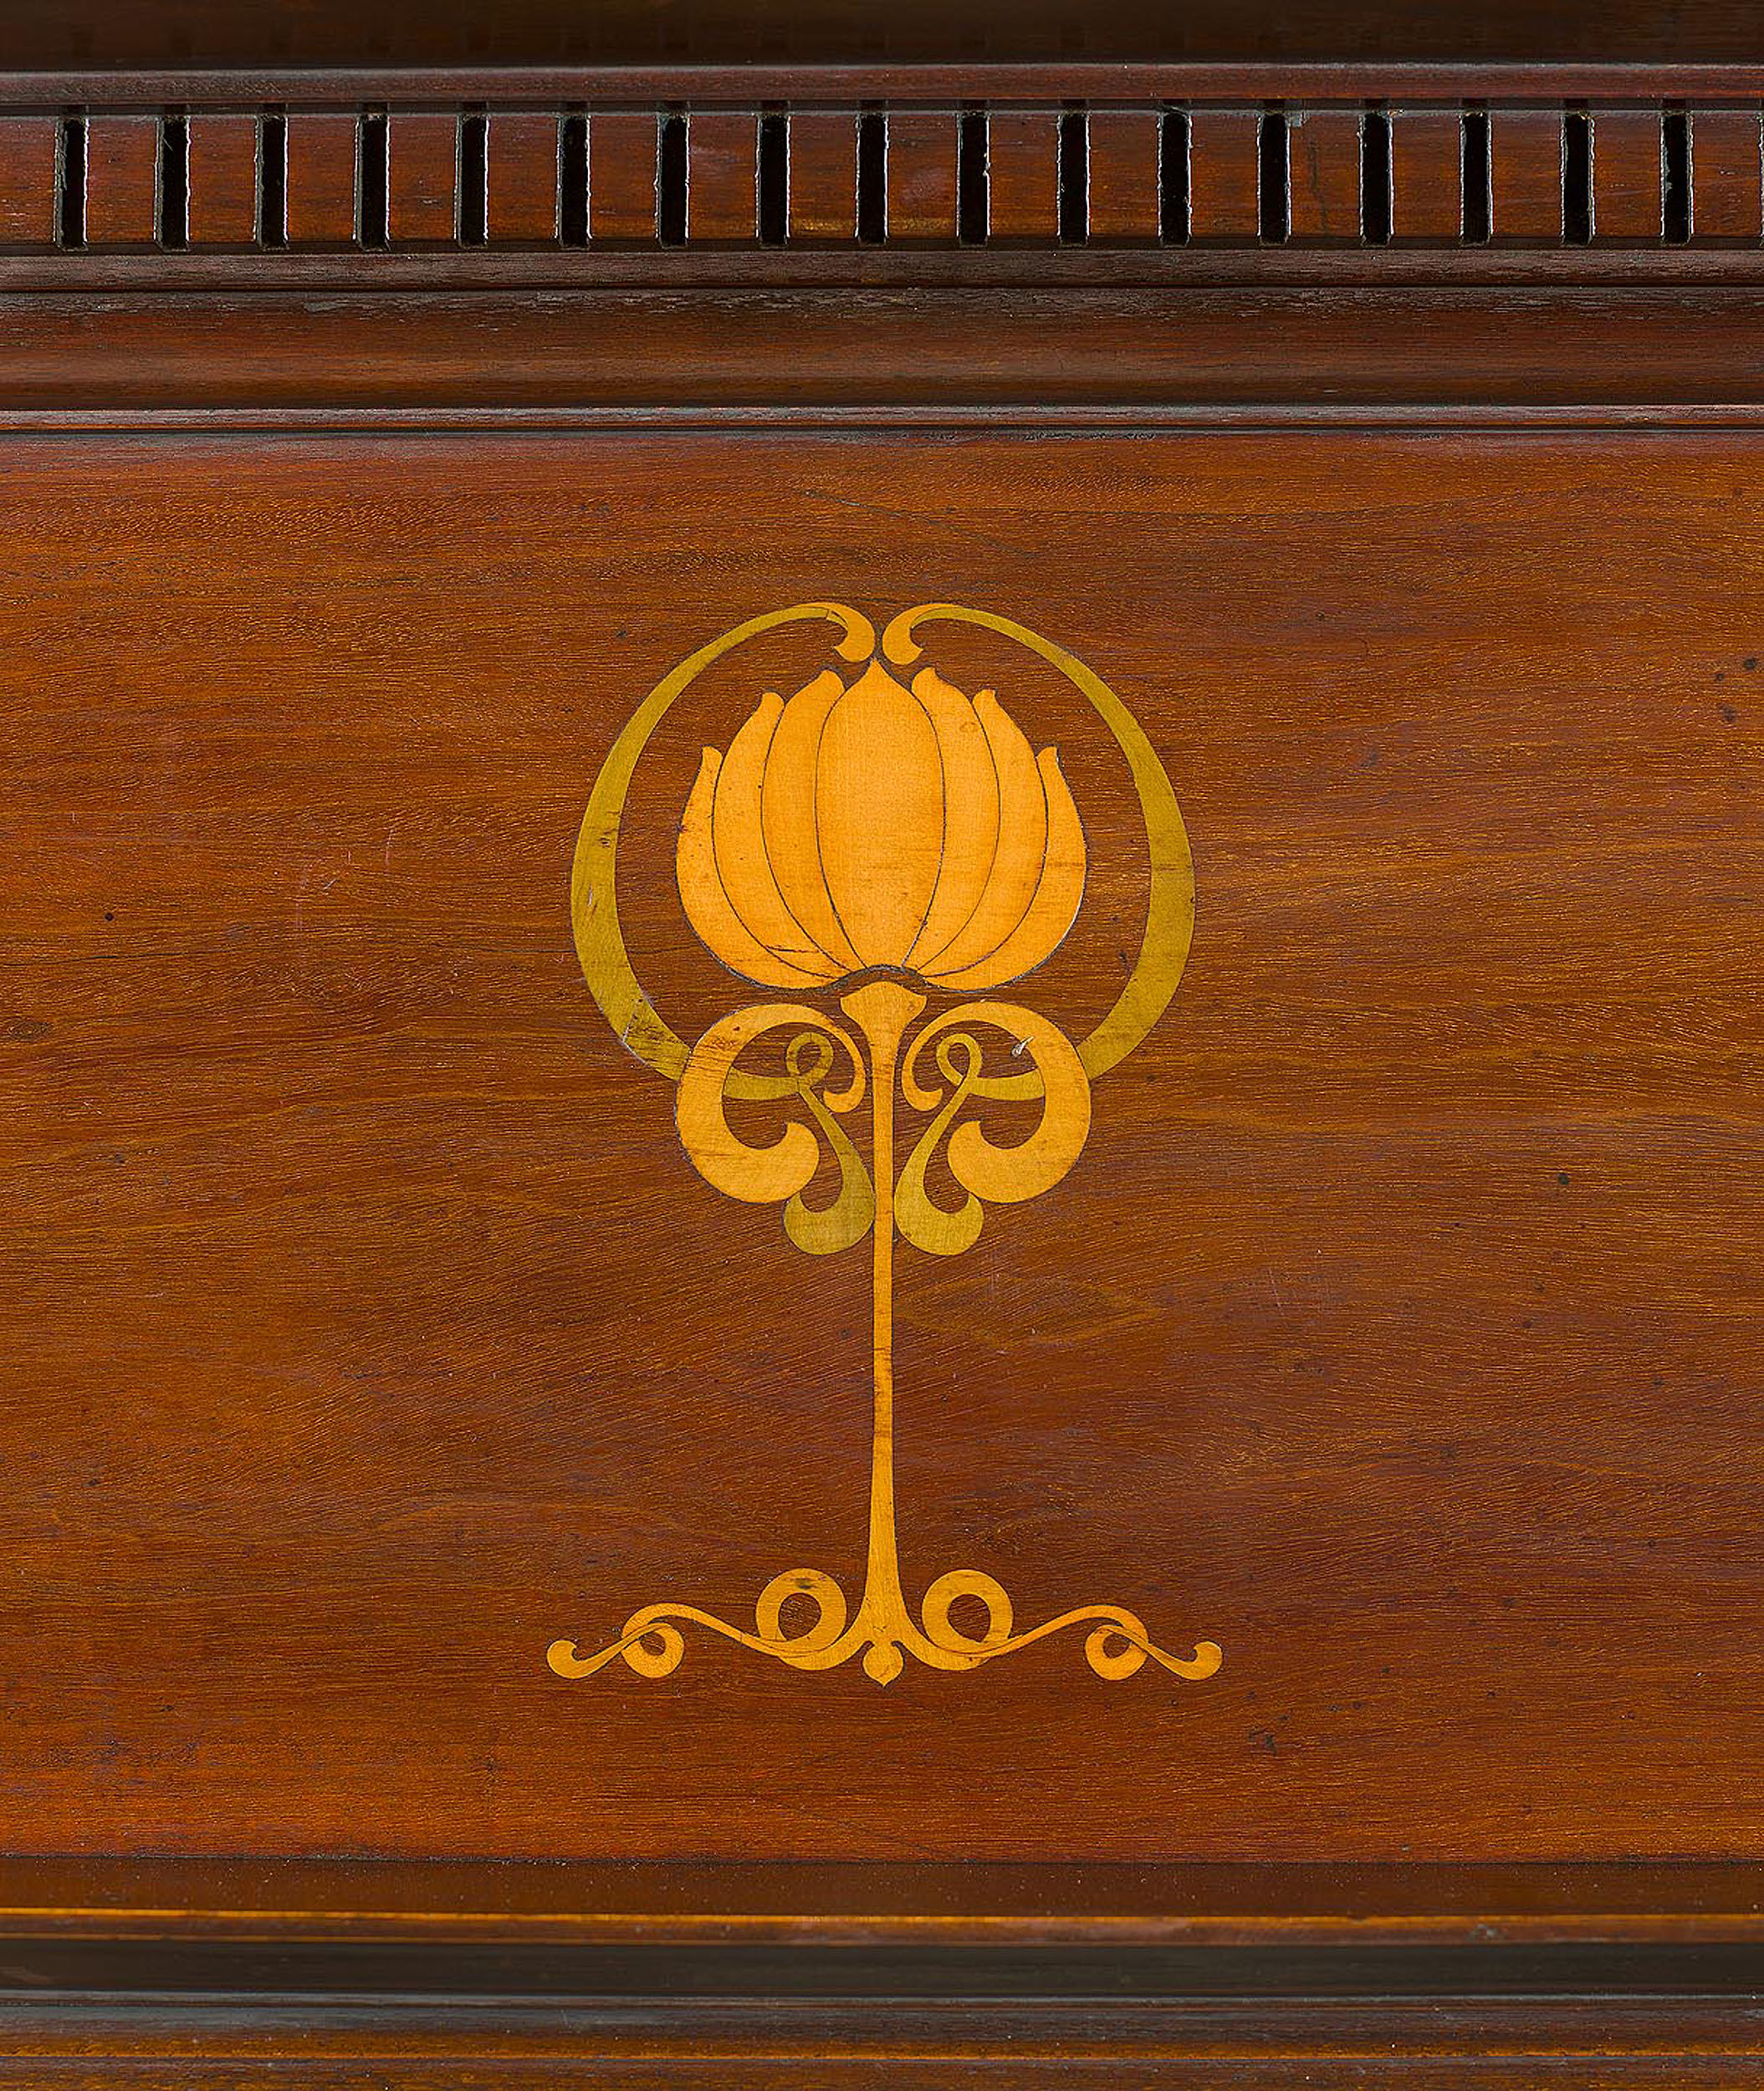 An Edwardian Inlaid Marquetry Fire Surround